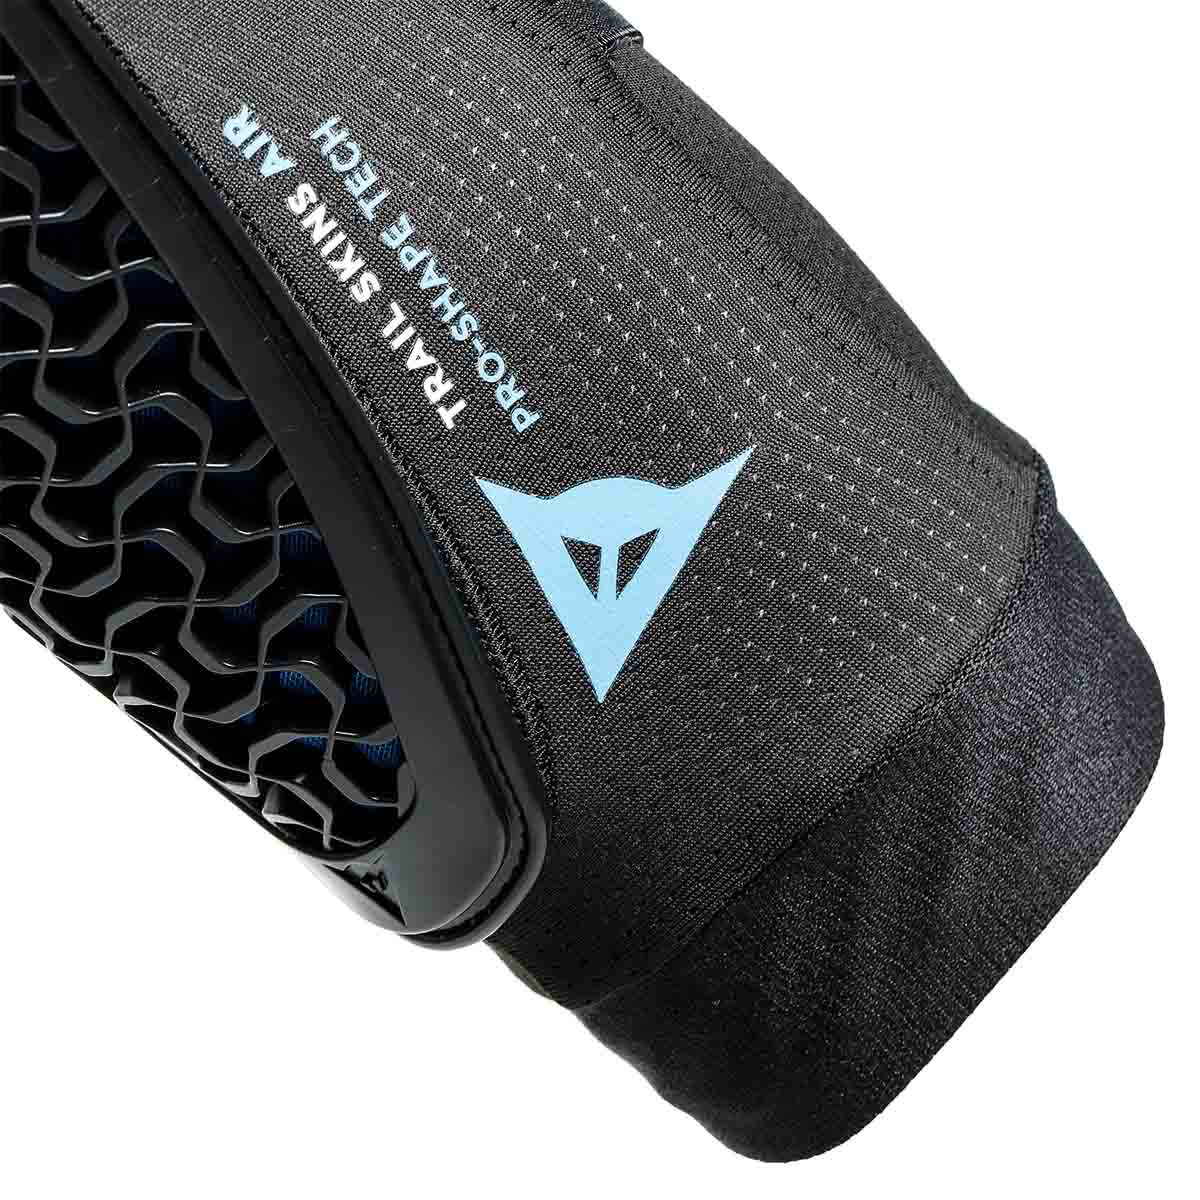 TRAIL SKINS AIR ELBOW GUARDS